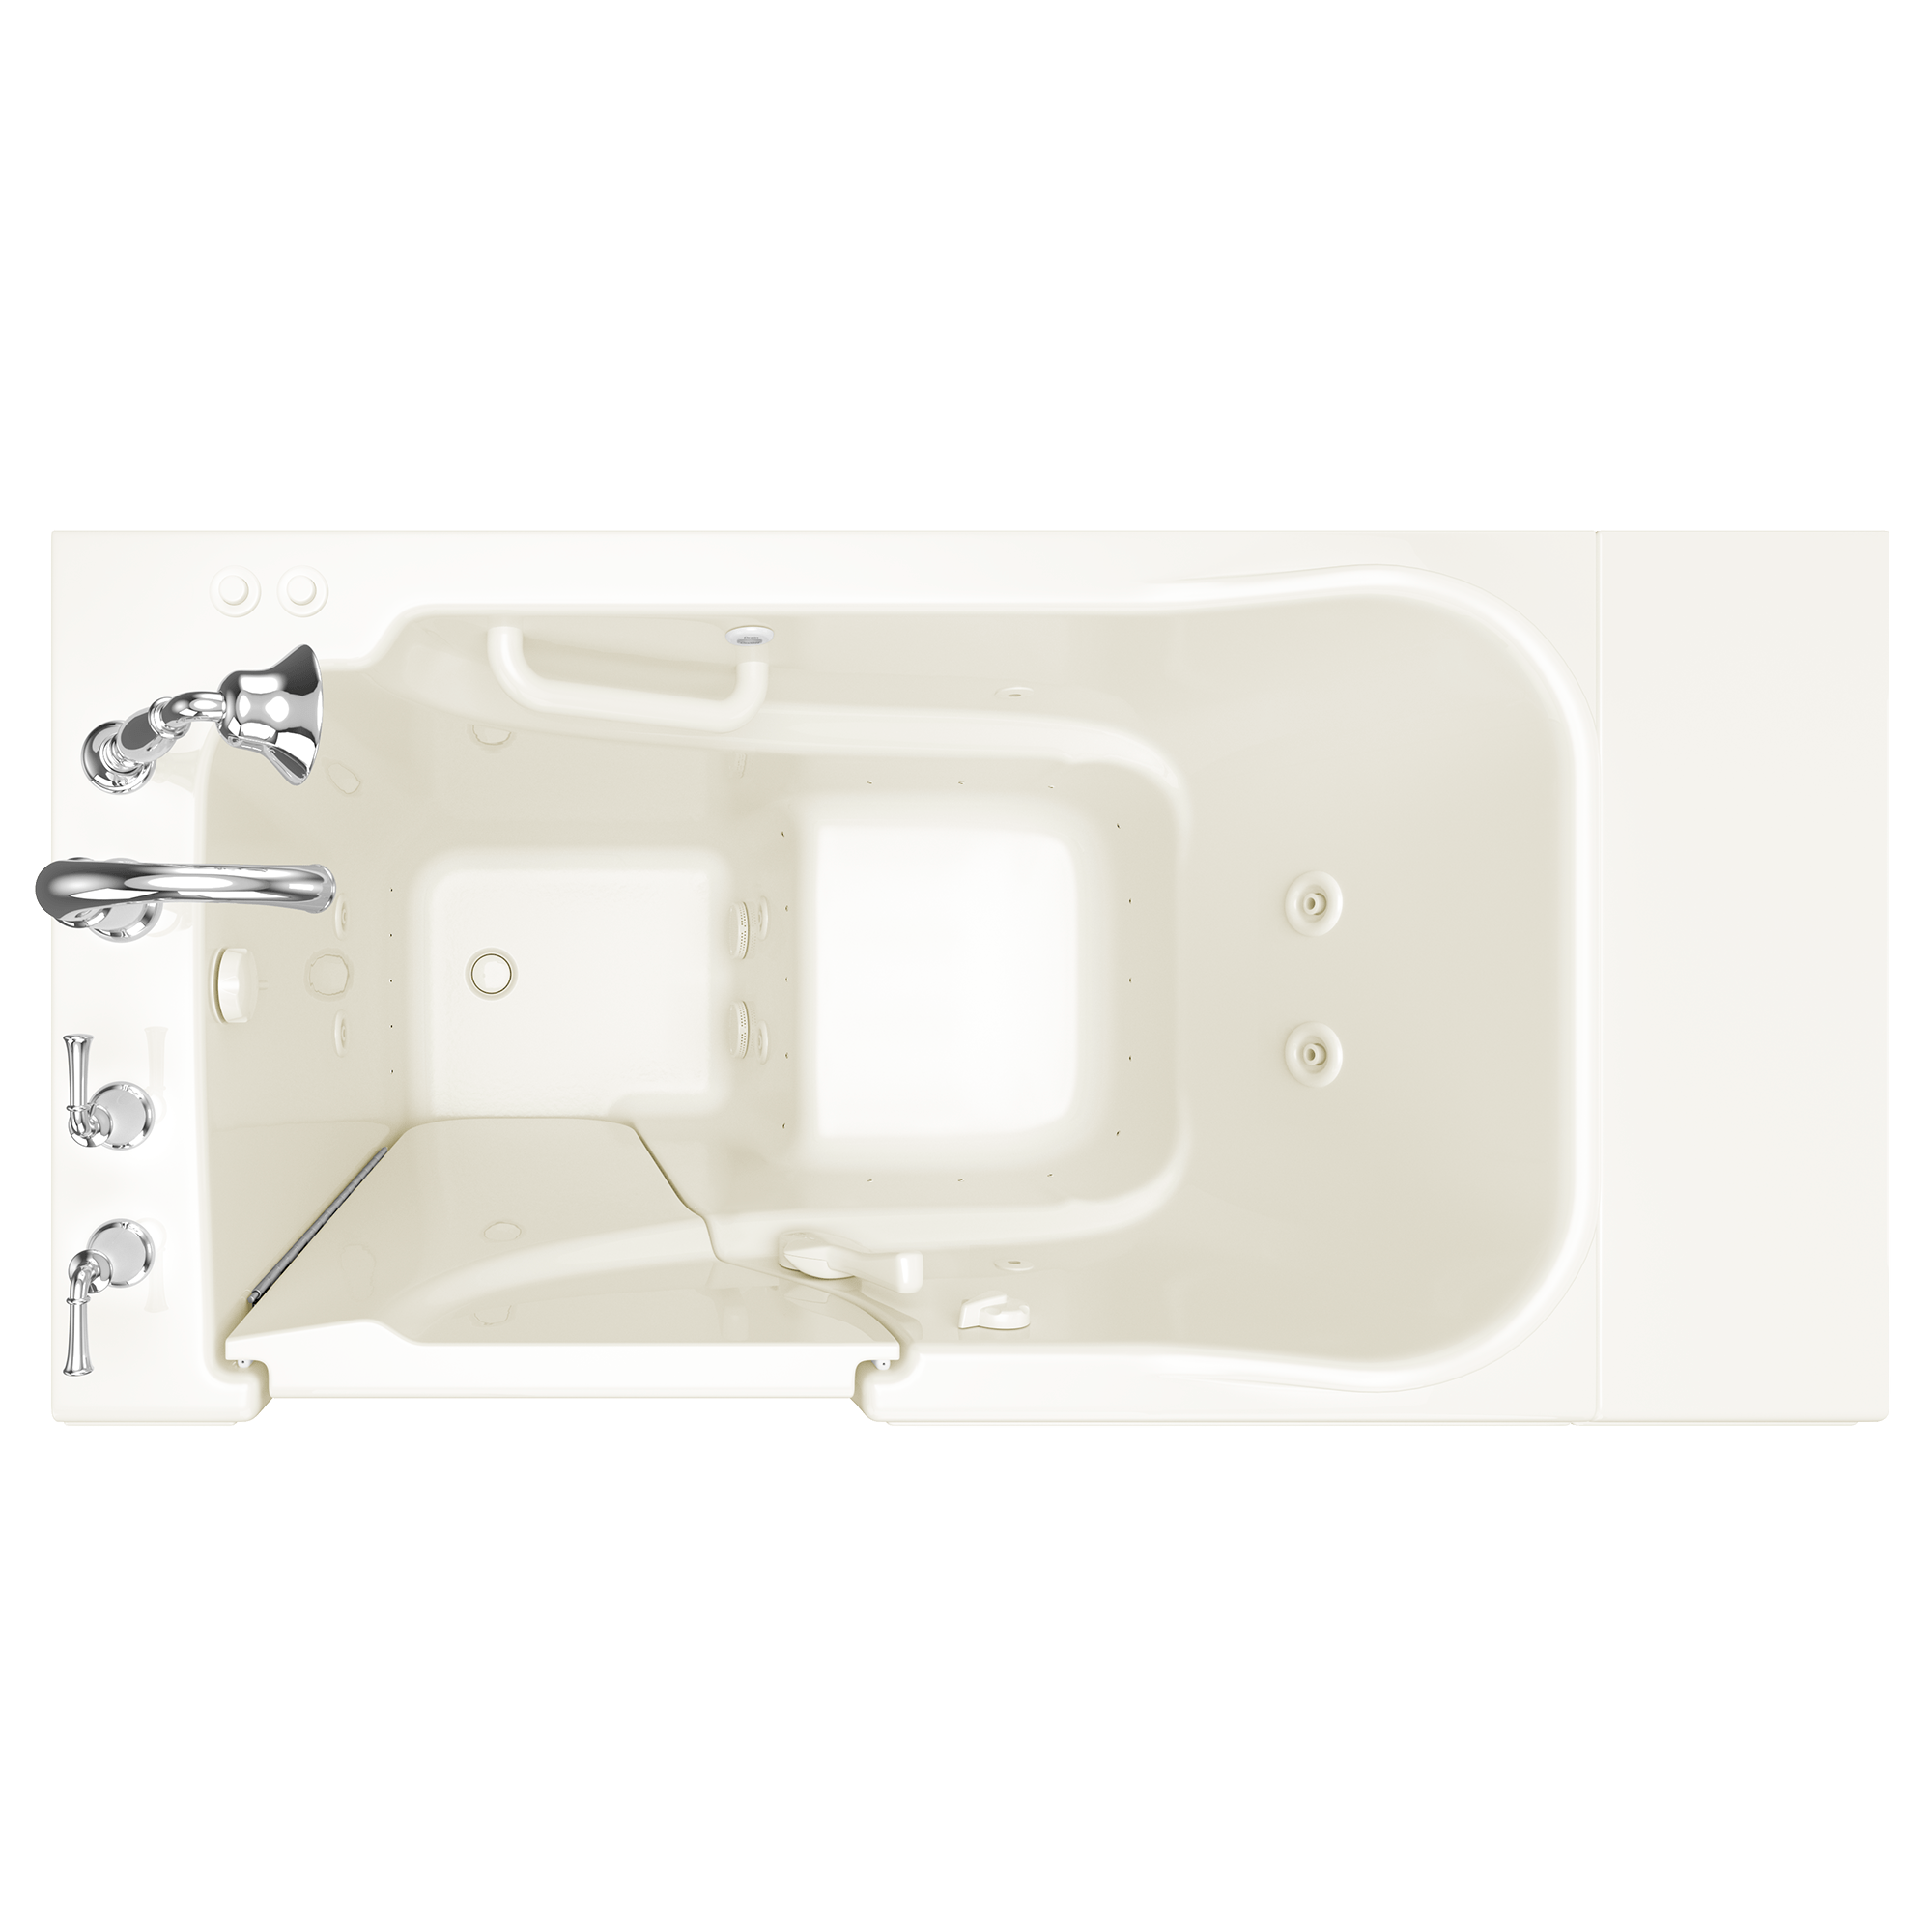 Gelcoat Value Series 30 x 52 -Inch Walk-in Tub With Combination Air Spa and Whirlpool Systems - Left-Hand Drain With Faucet